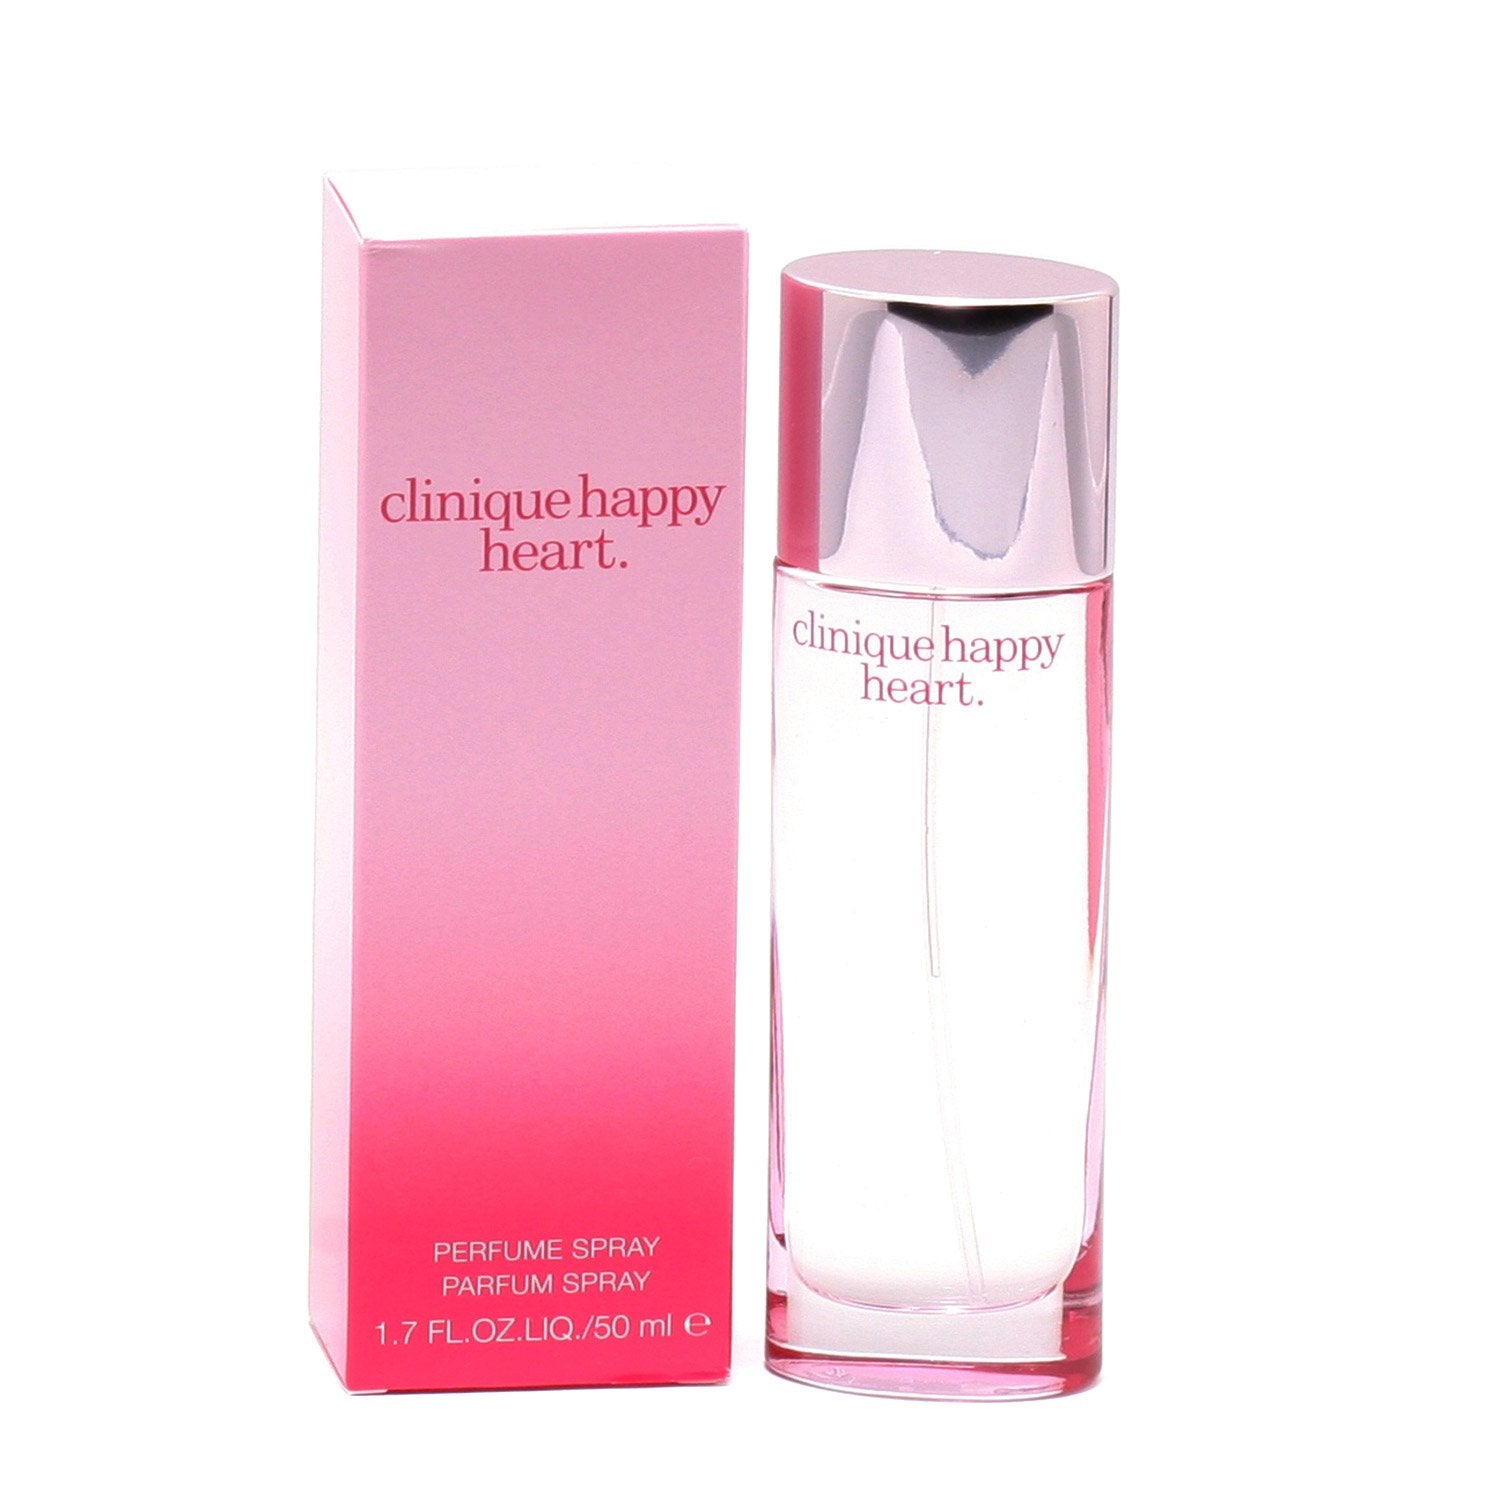 HAPPY HEART FOR WOMEN BY CLINIQUE PARFUM SPRAY – Fragrance